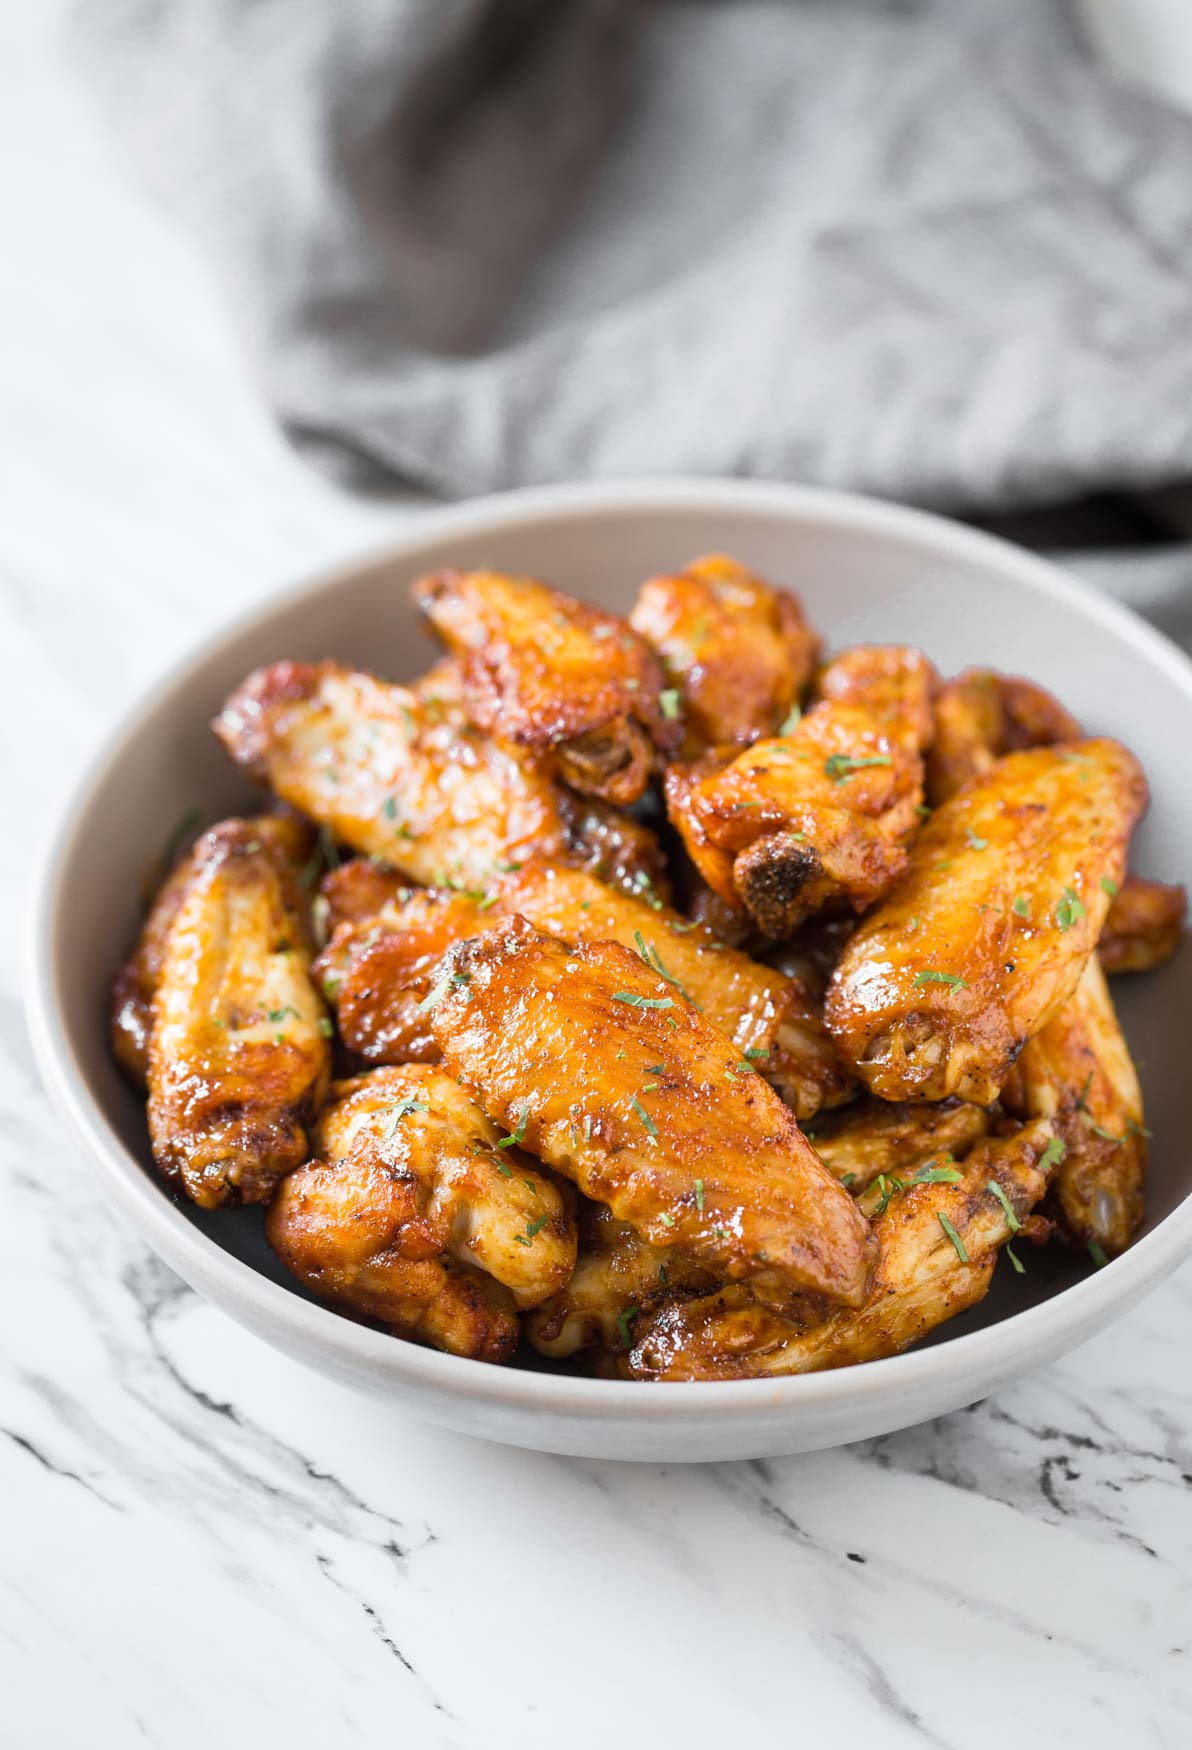 These healthy Air Fryer BBQ Chicken Wings are juicy & tender with amazing smokey flavors from the bbq sauce. Under 30 min, a quick & easy party appetizer or snack recipe.